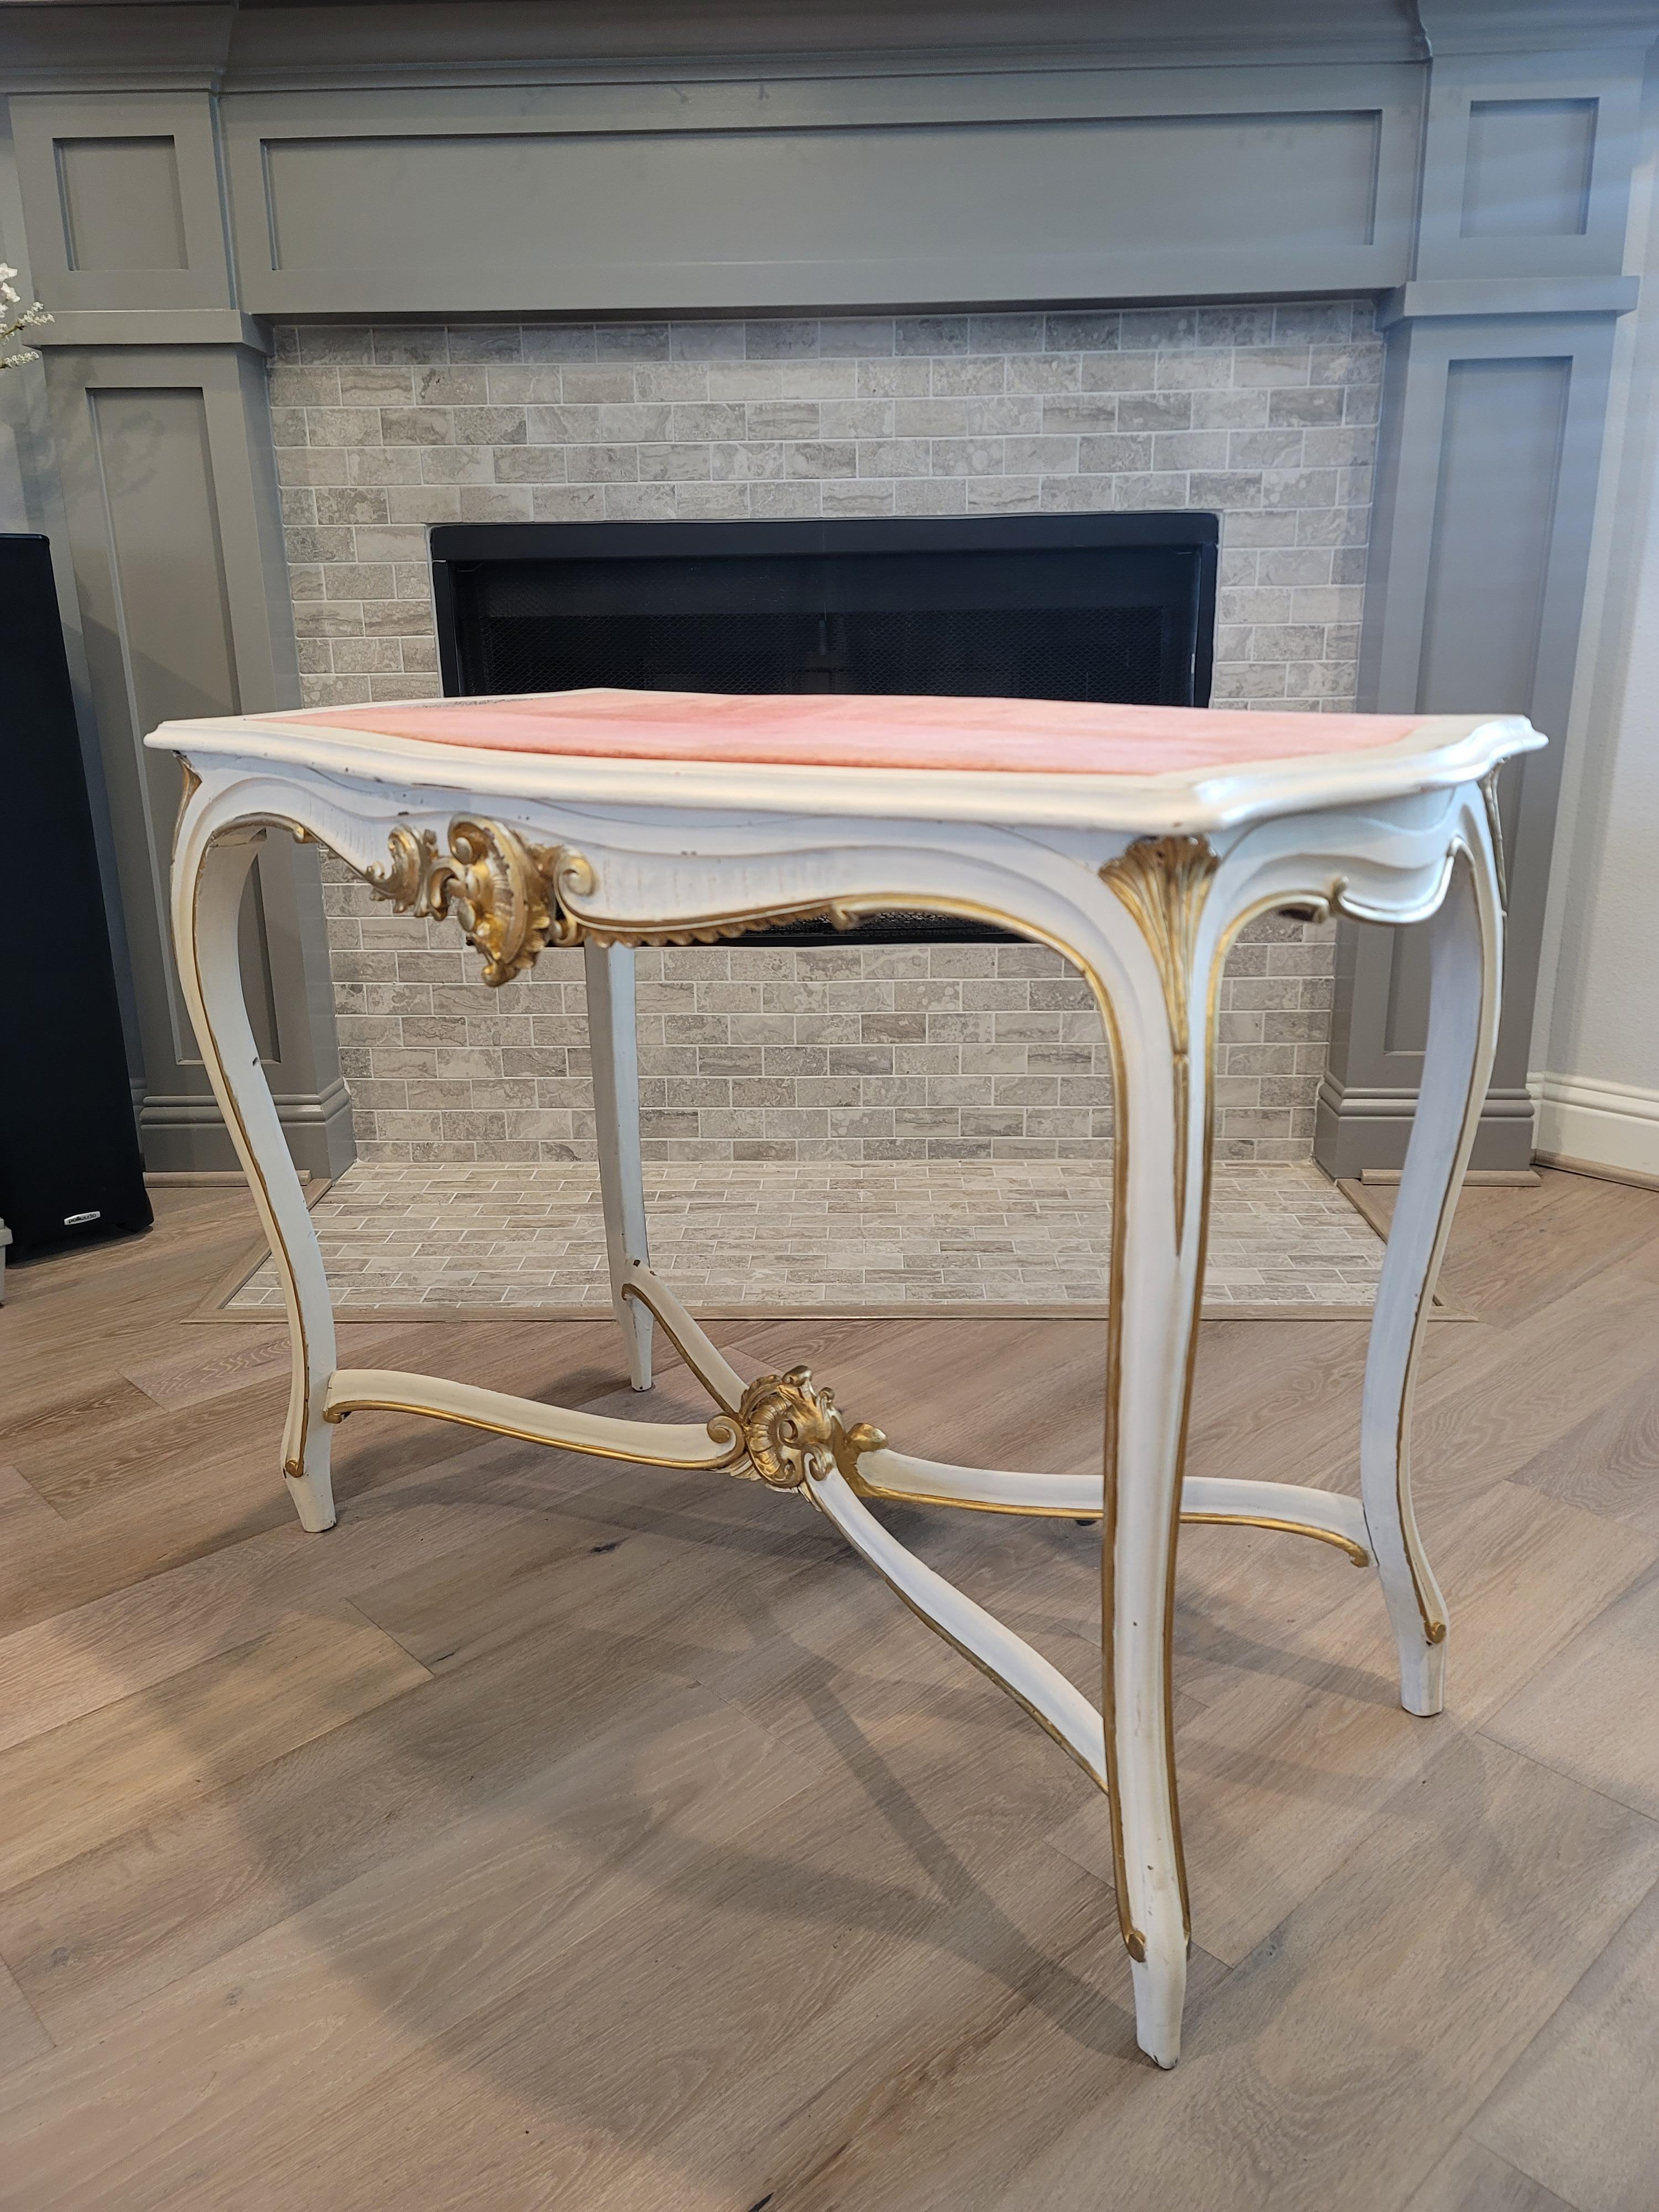 A elegant vintage French Louis XV style hand carved and painted center table with giltwood accents. 

Add a touch of timeless sophisticated elegance and luxurious romantic warmth to any space with this striking 18th century Louis XV style table.